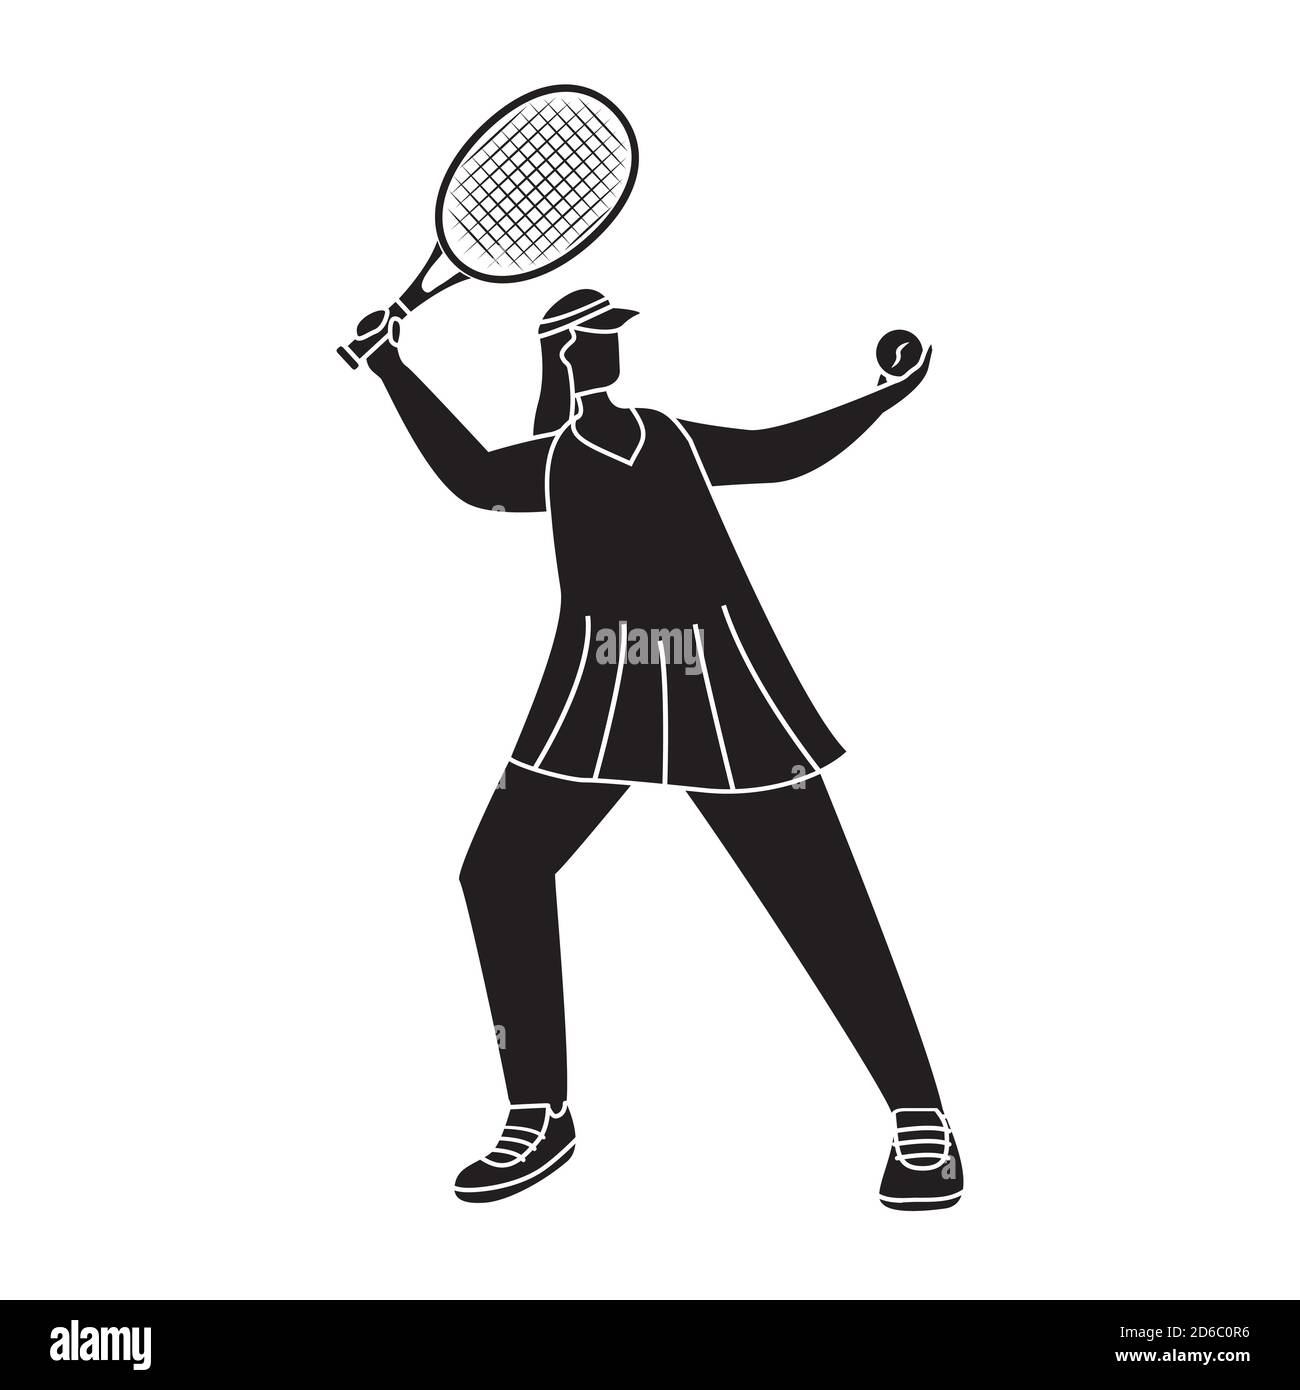 Woman playing tennis.Young girl play a sport game in silhouette. Stock Vector